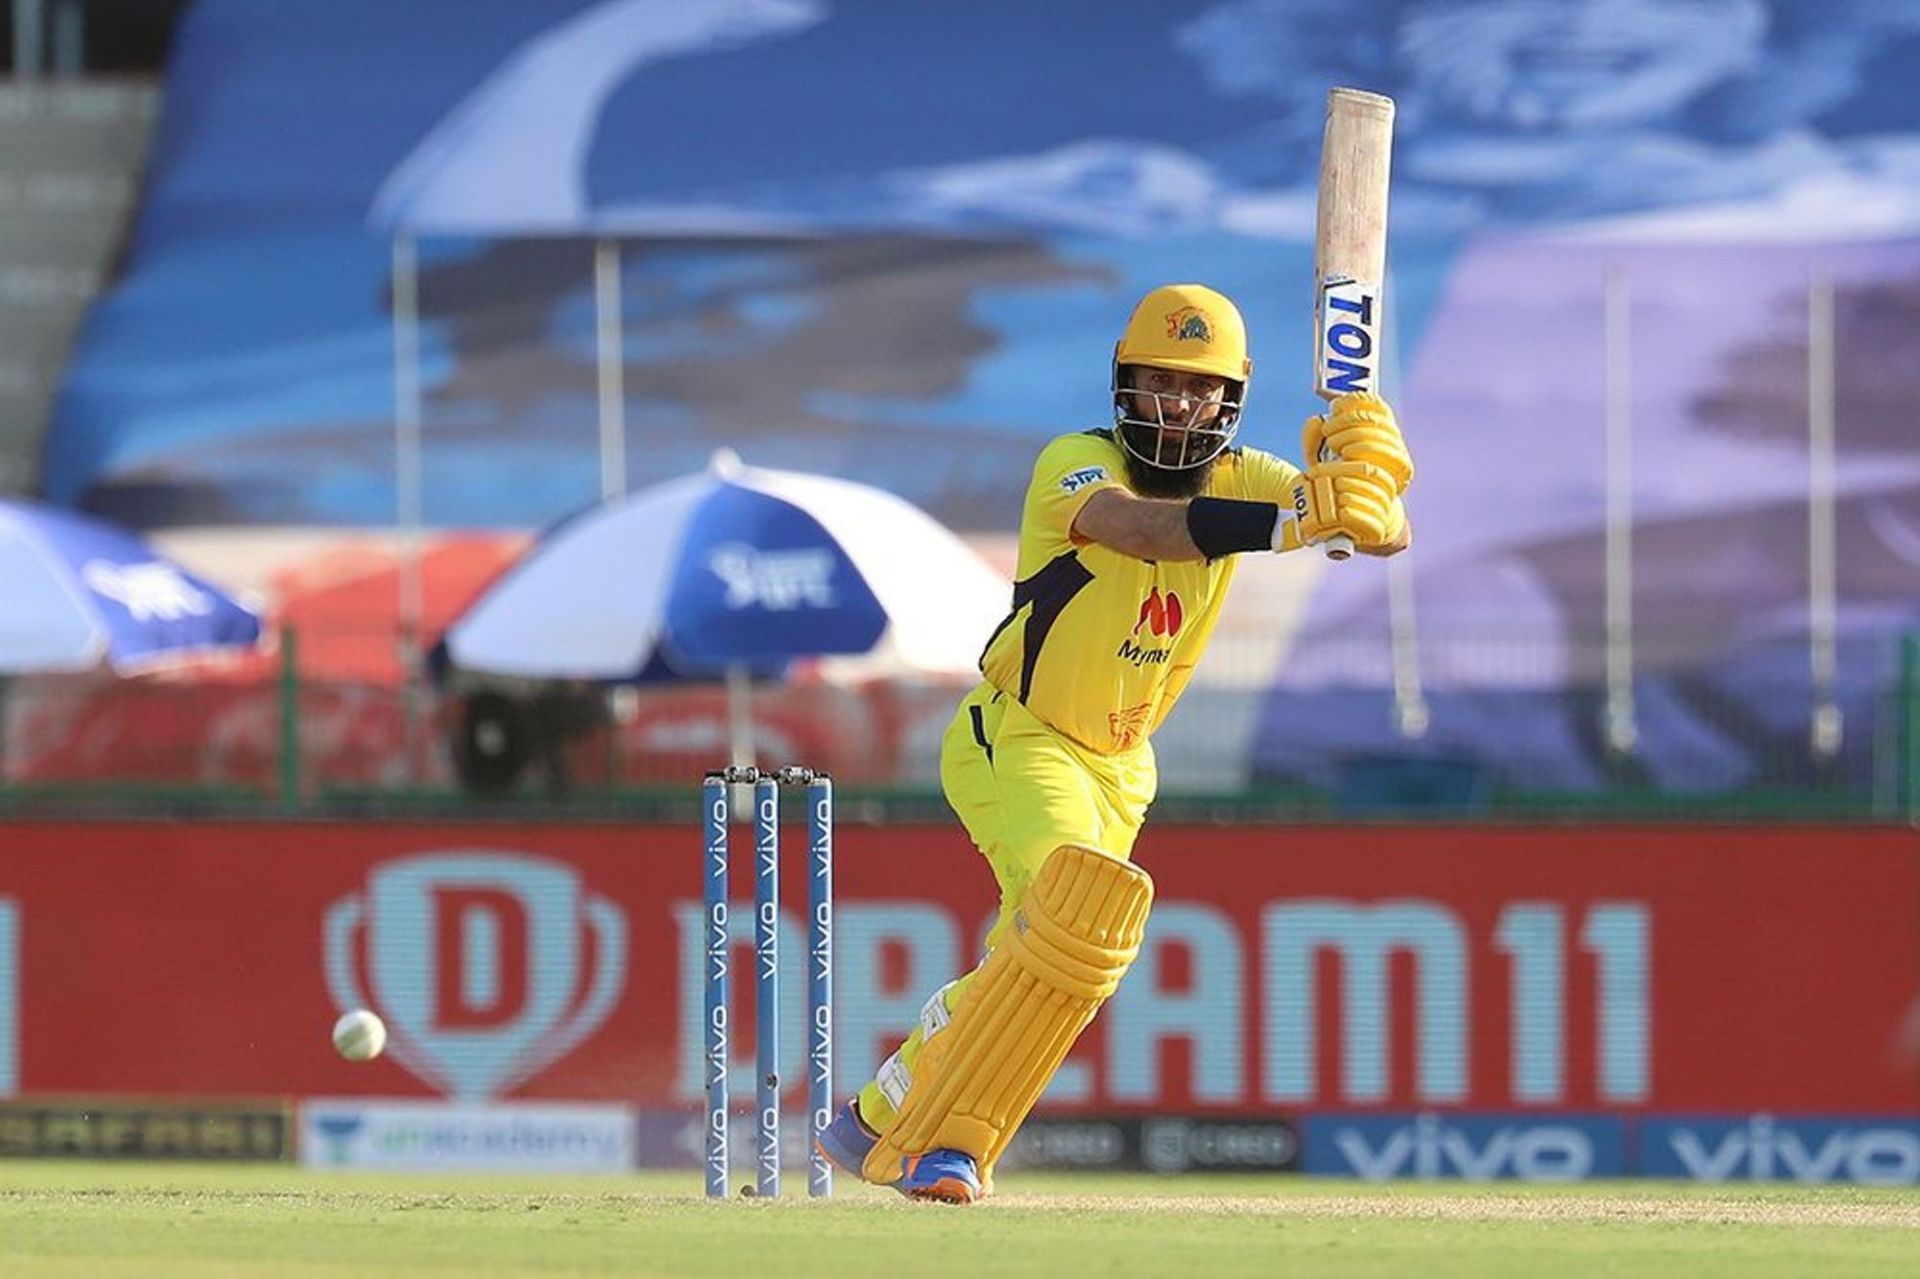 Moeen Ali has struggled with the bat for CSK in the UAE. [P/C: iplt20.com]